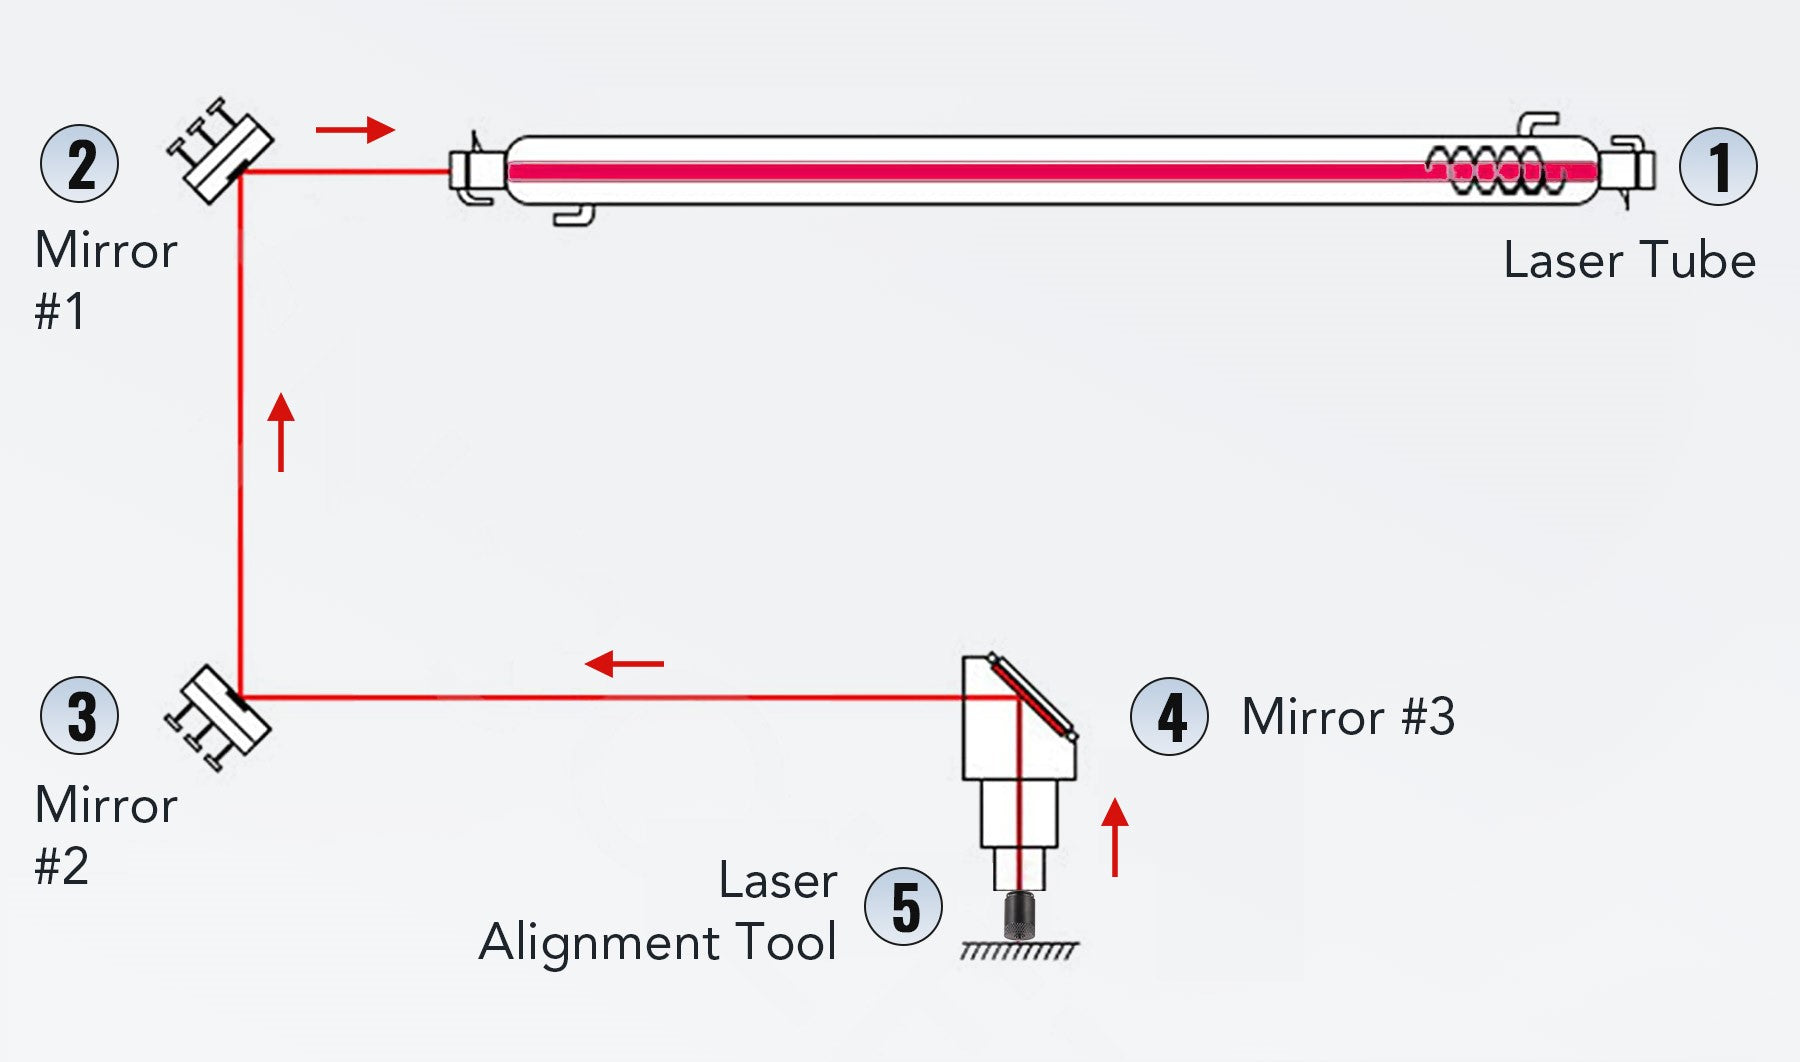 uses a CO2 laser source to generate an infrared beam